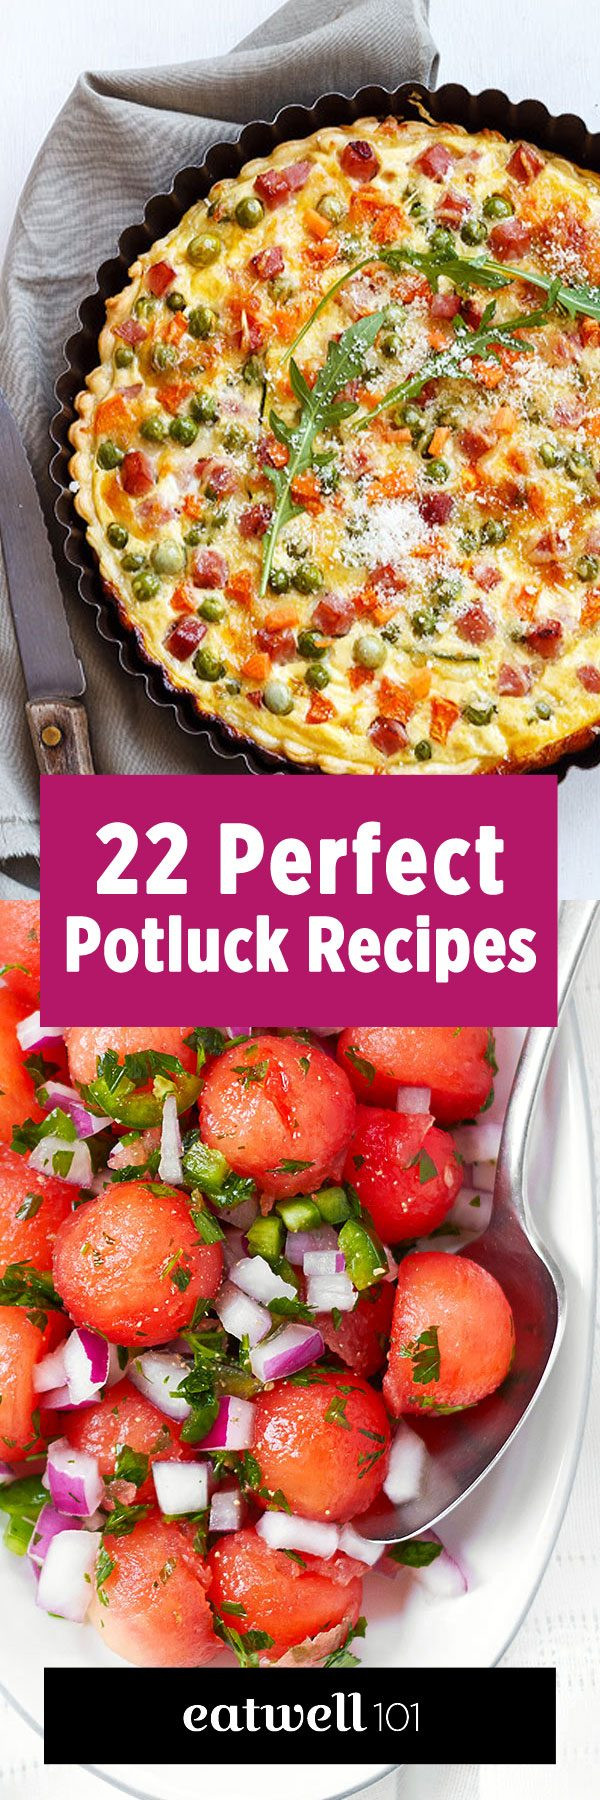 Food Ideas To Bring To A Party
 31 Best Dishes Perfect to Bring to a Potluck Party